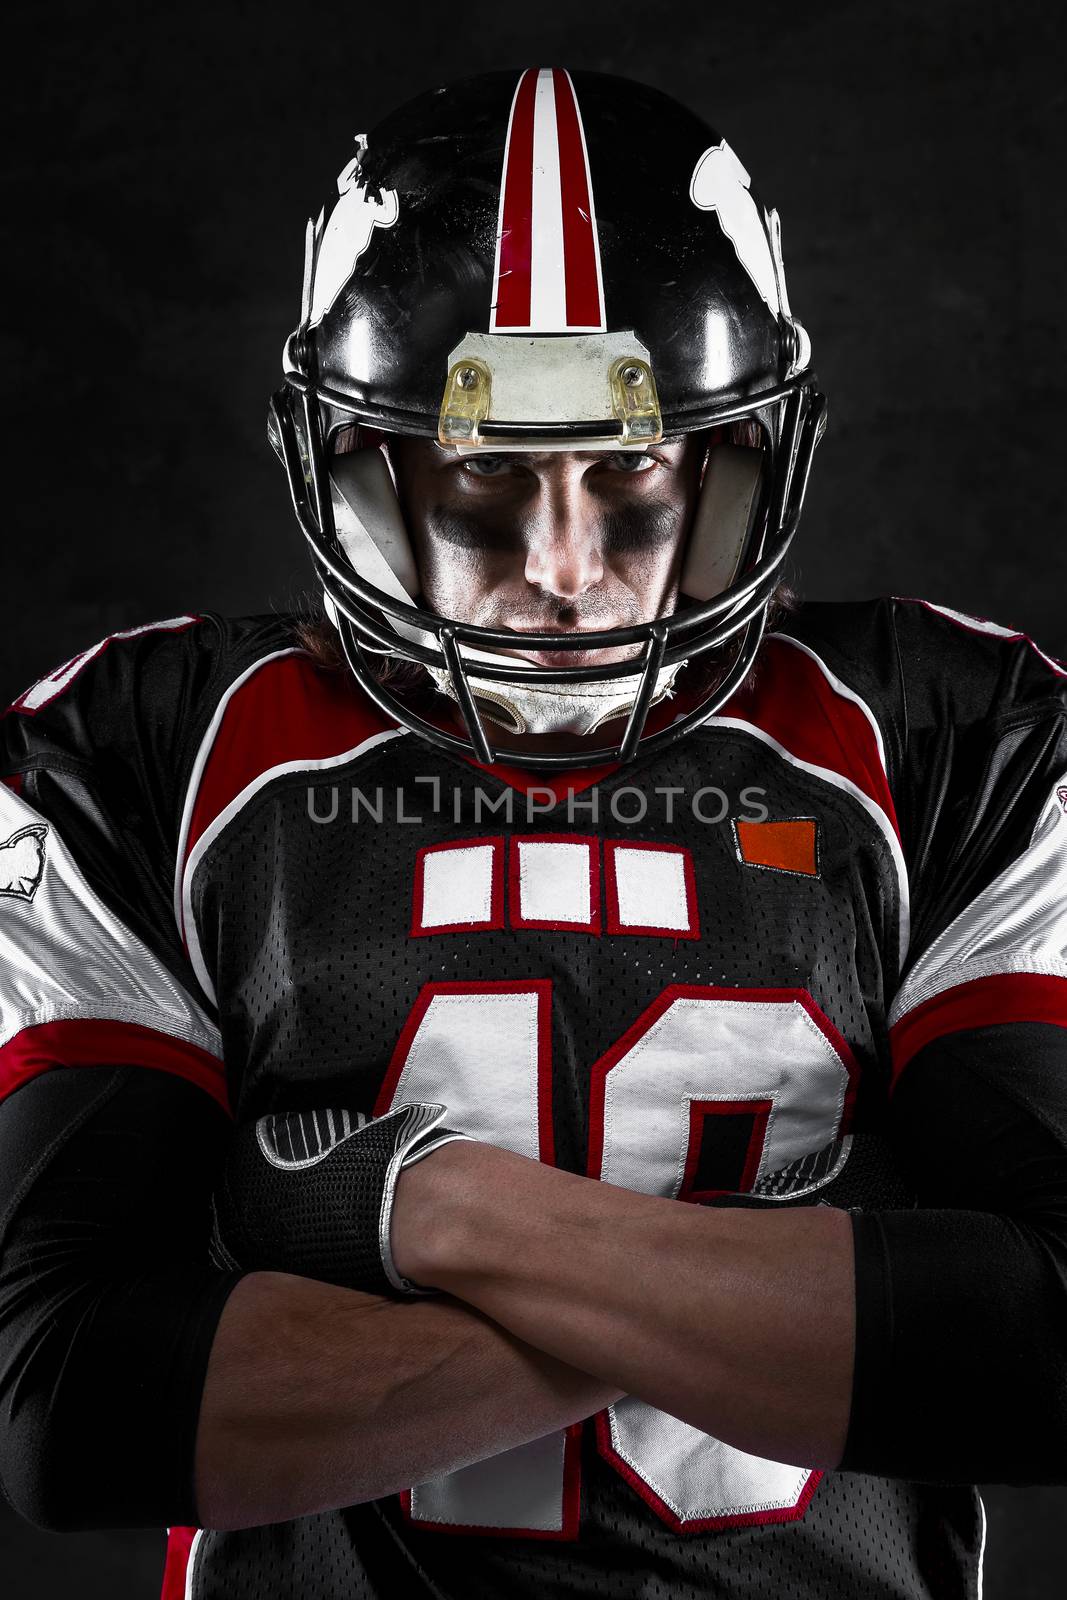 Portrait of american football player with intense gaze